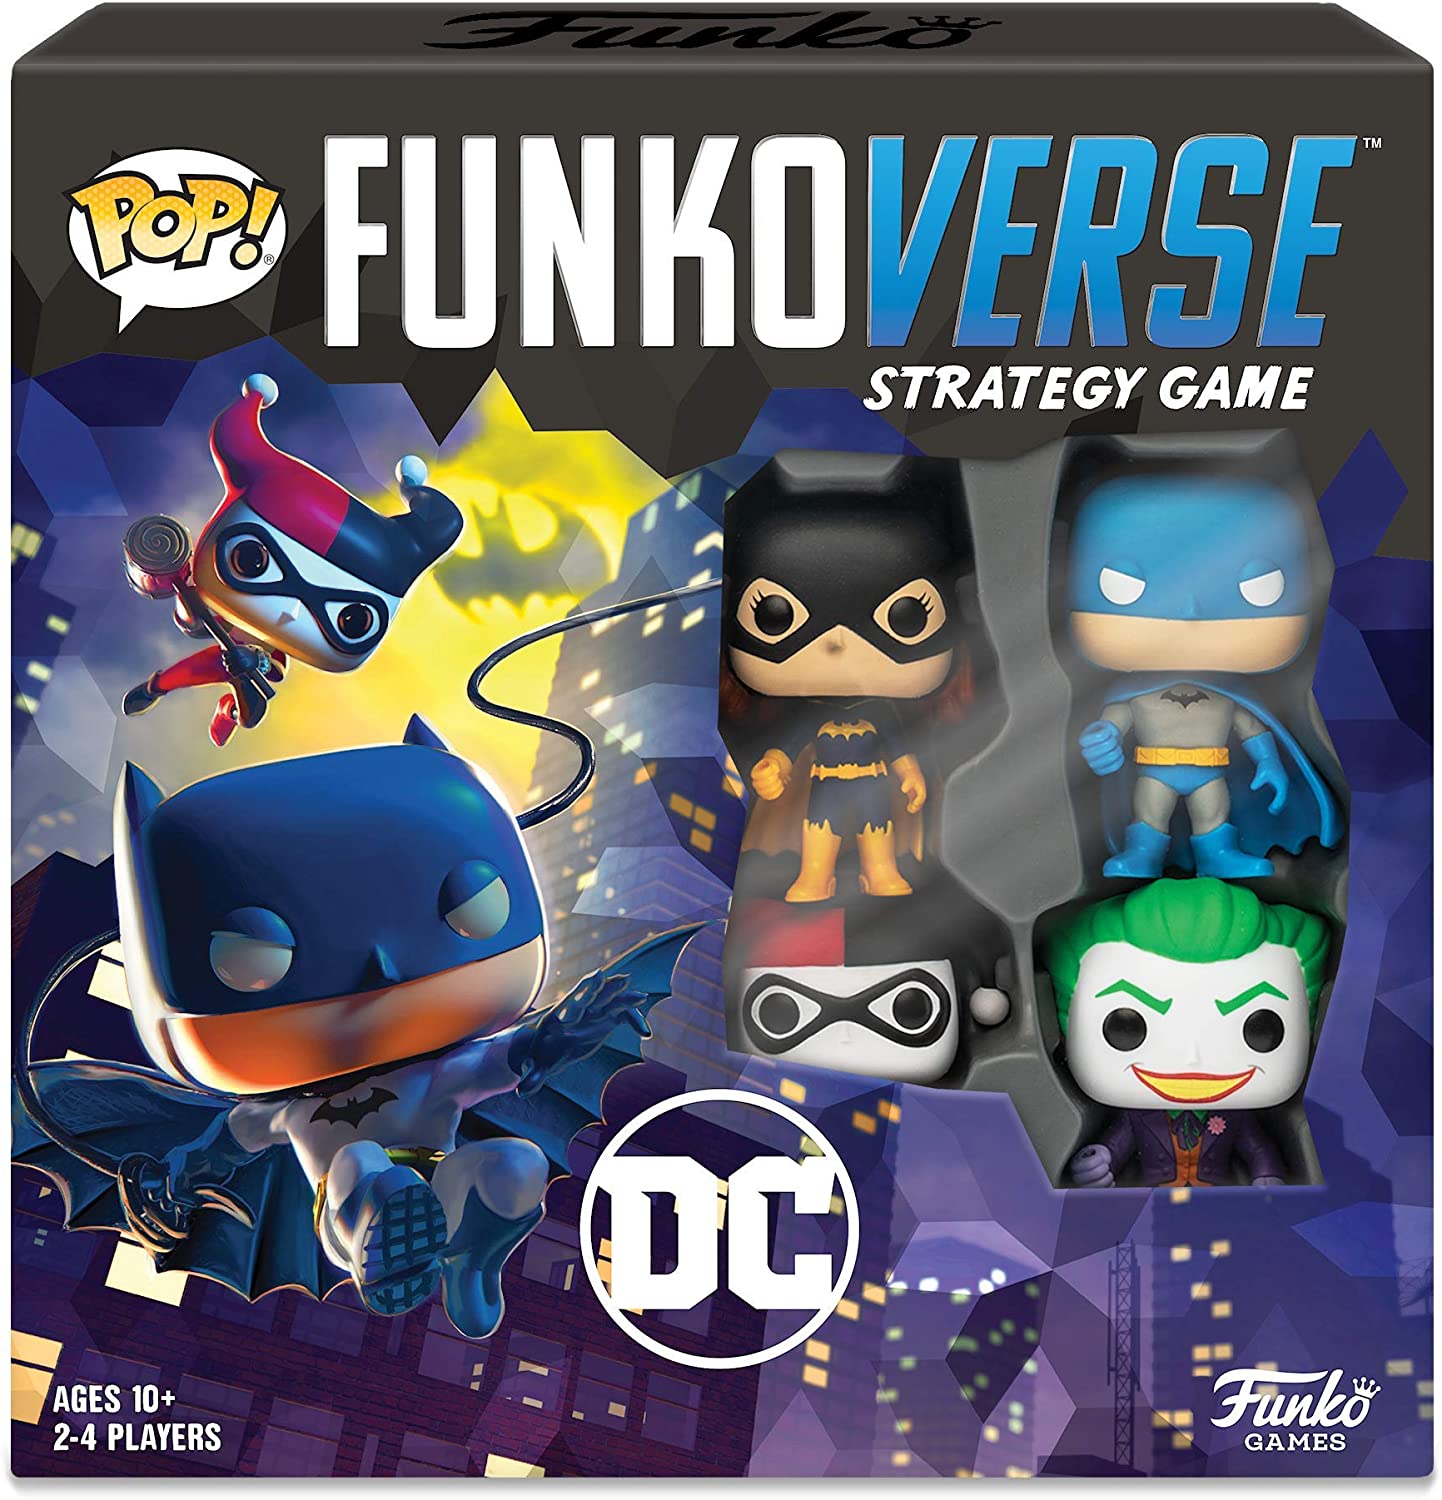 Best gifts for tweens; The new Funkoverse DC Comics strategy game from Funko Pop